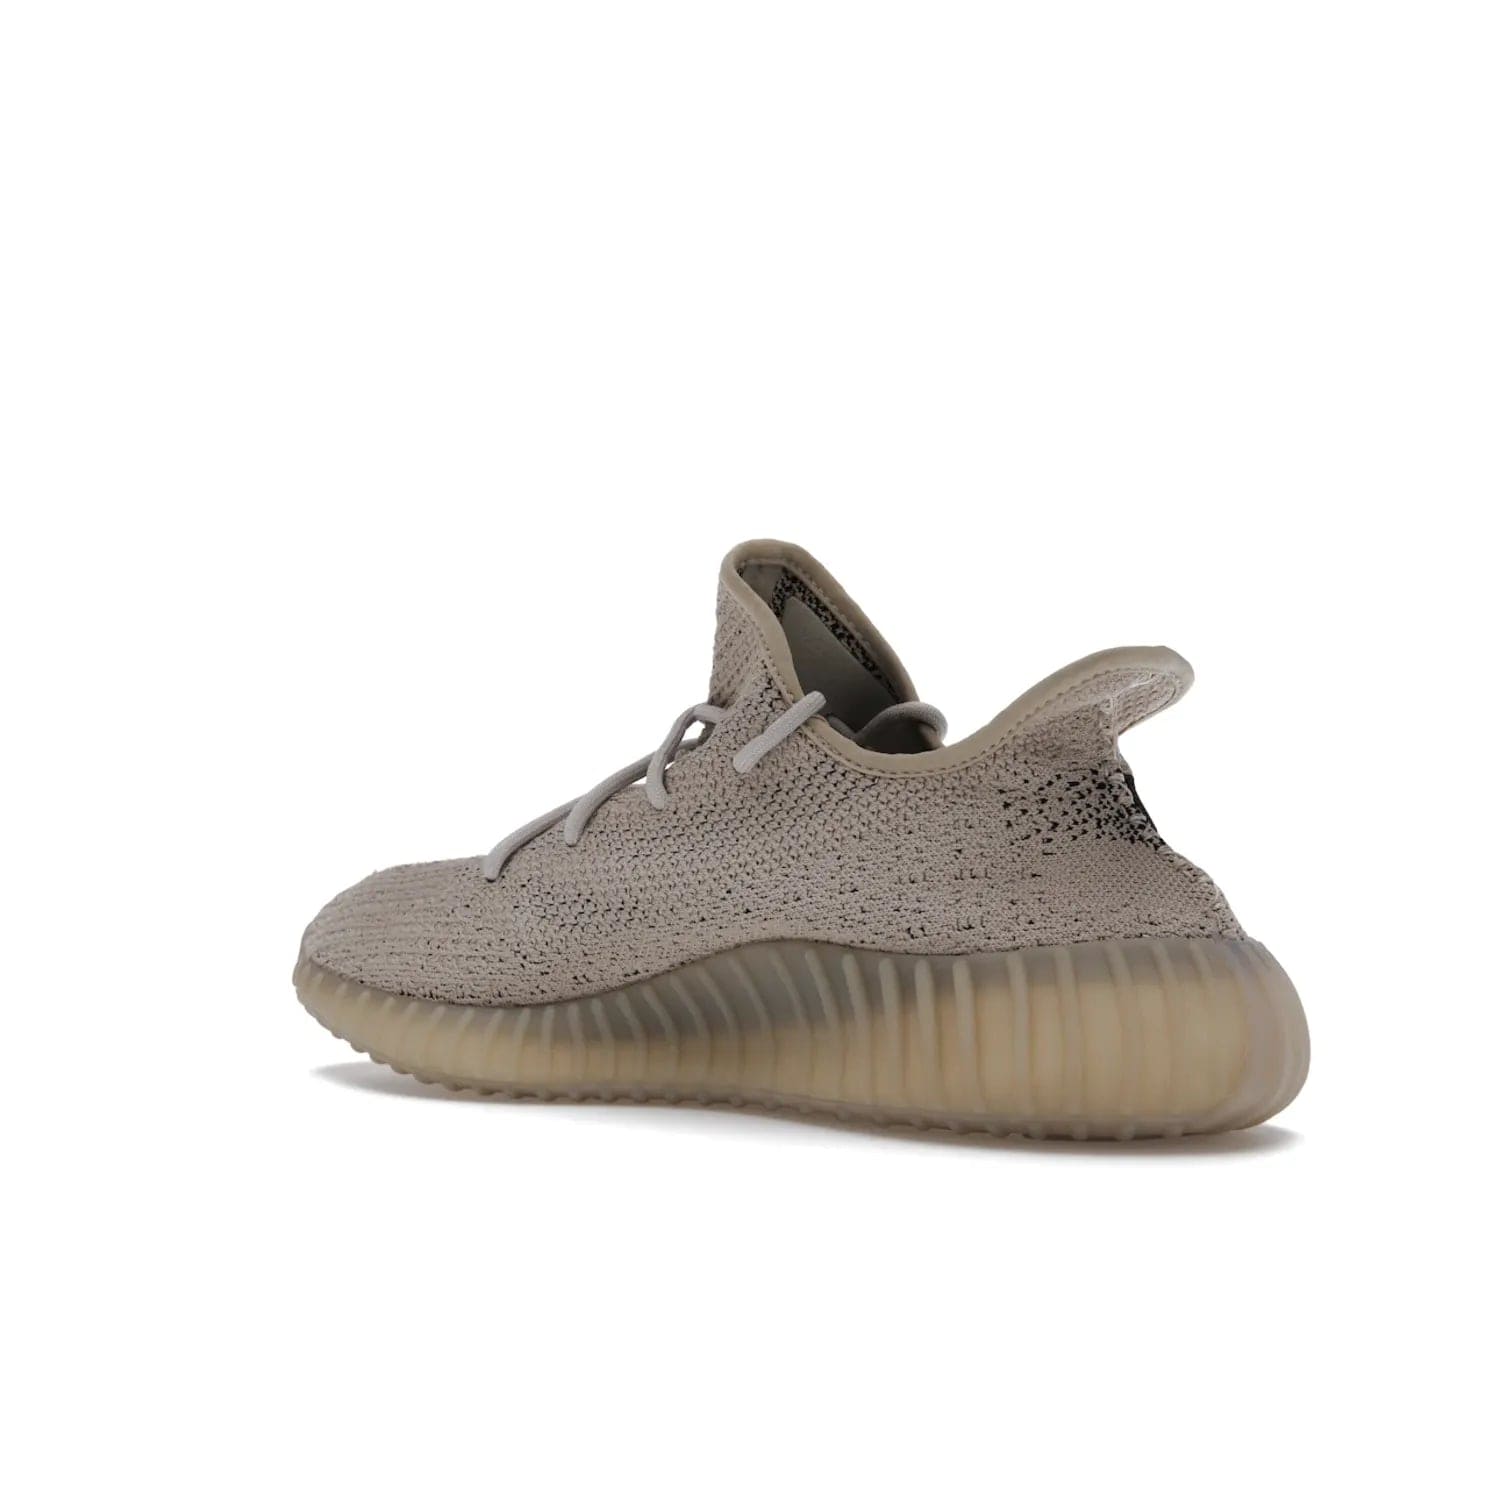 adidas Yeezy Boost 350 V2 Slate - Image 23 - Only at www.BallersClubKickz.com - Adidas Yeezy Boost 350 V2 Slate Core Black Slate featuring Primeknit upper, Boost midsole and semi-translucent TPU cage. Launched on 3/9/2022, retailed at $230.